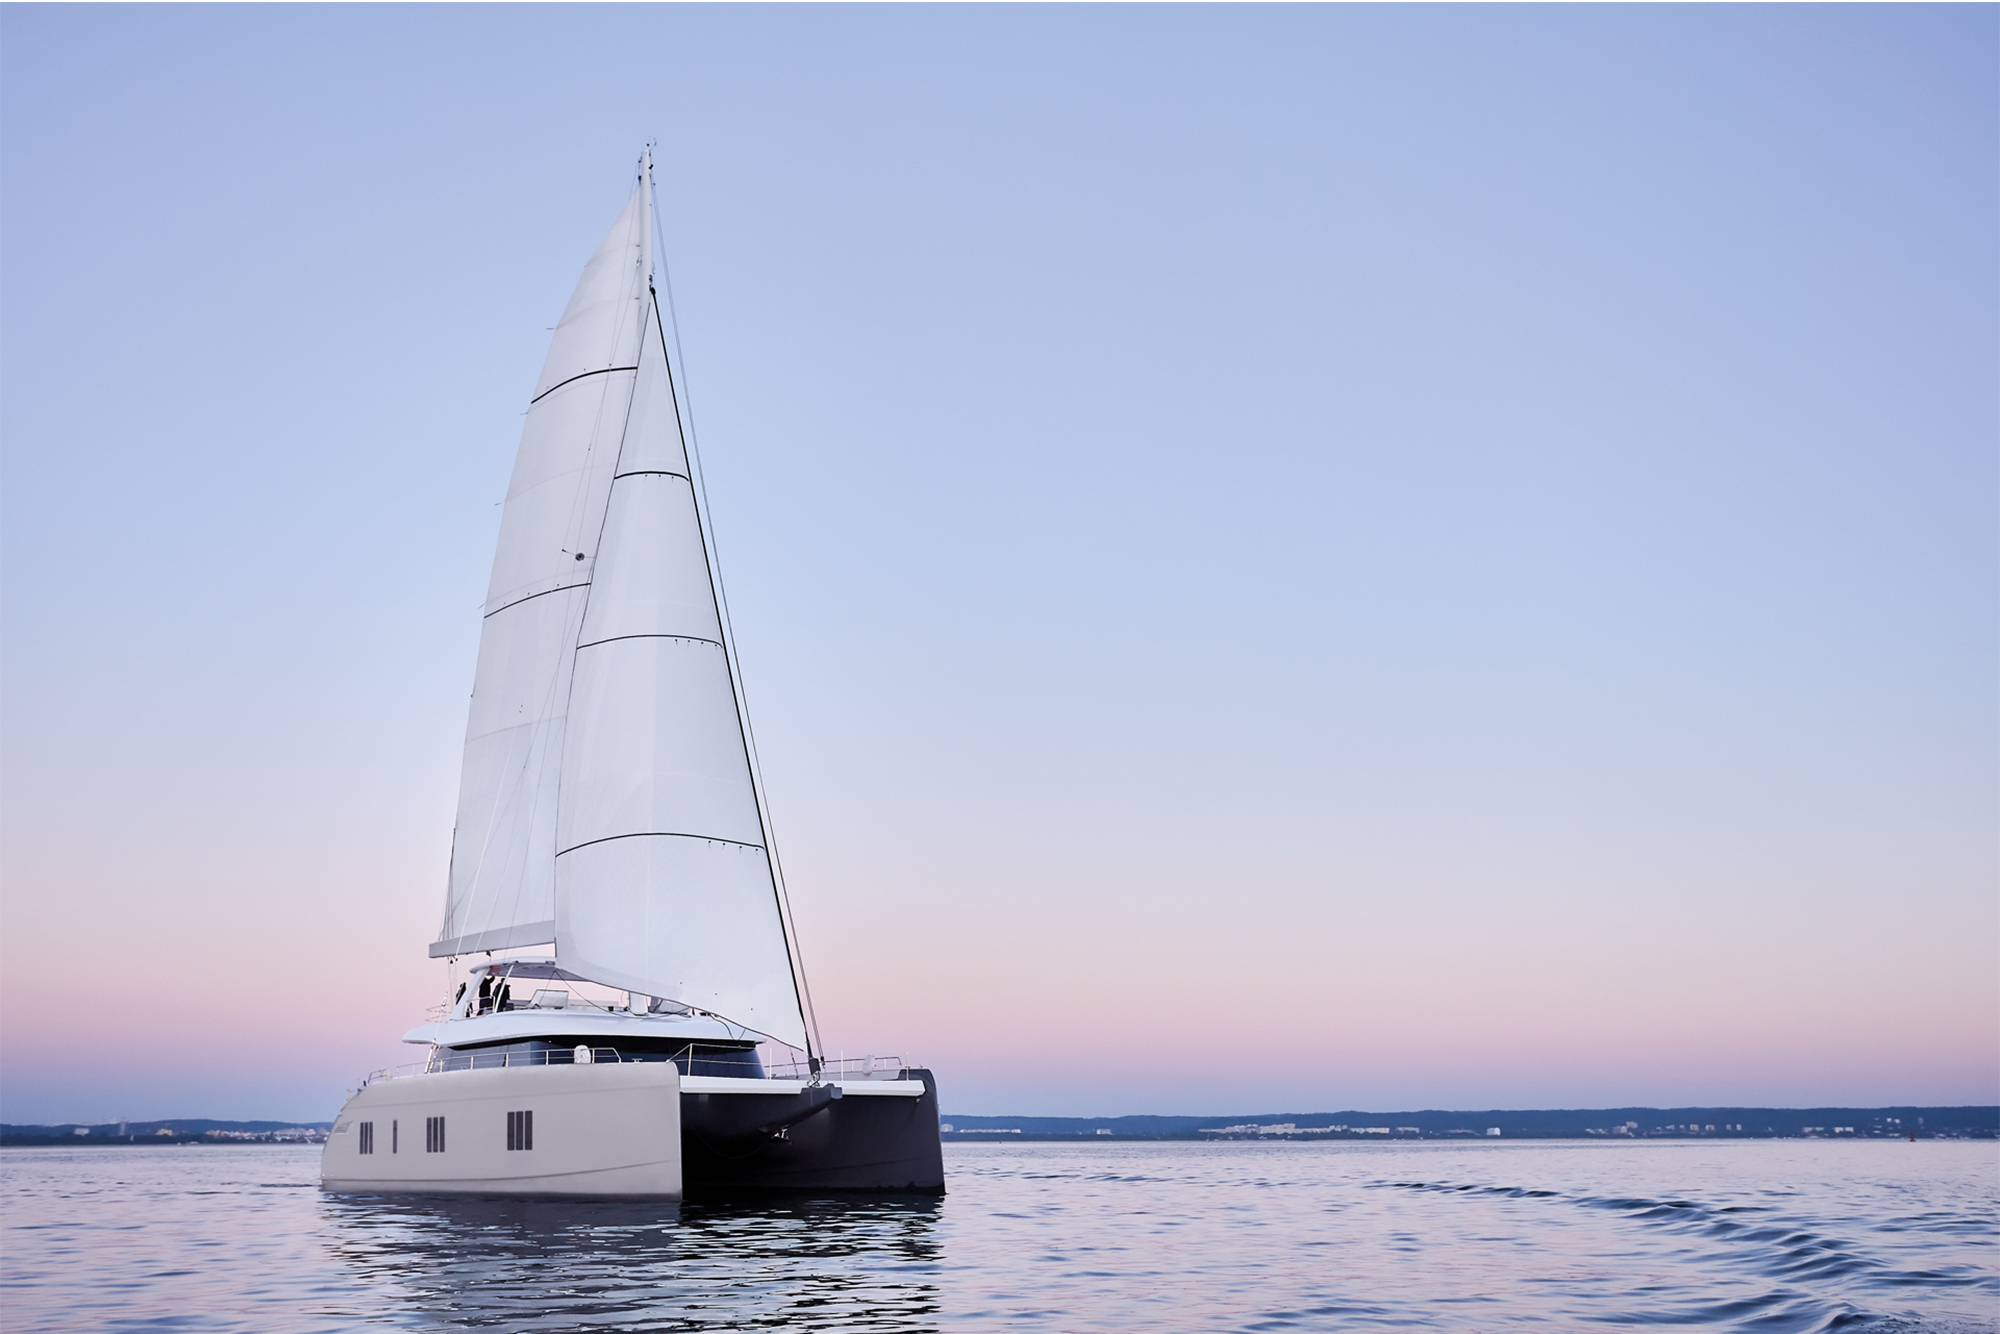 Launched Sail  for Sale  Sunreef 80 